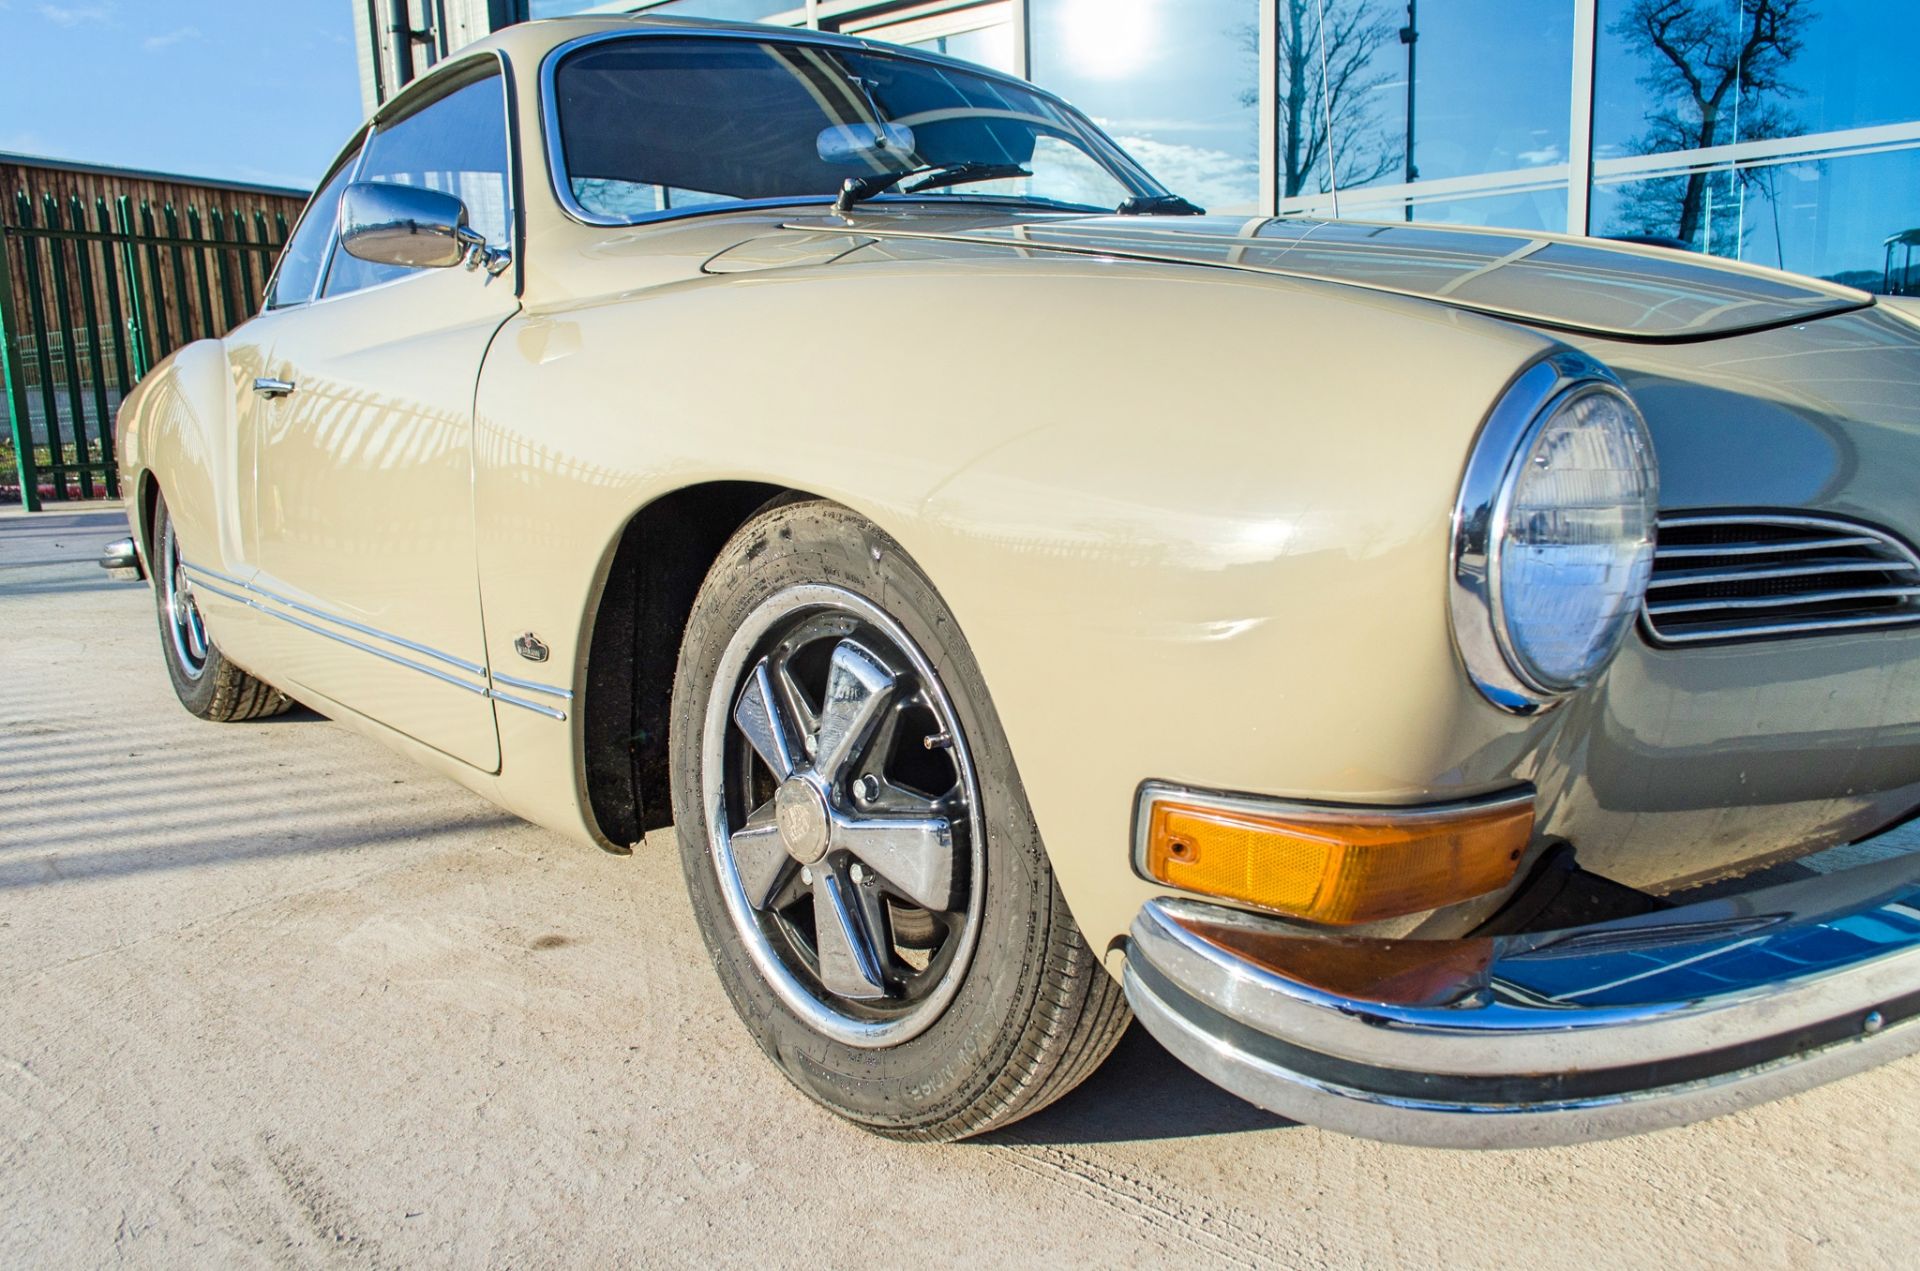 1972 Volkswagen Karmann Ghia 1641cc two door coupe - Image 17 of 52